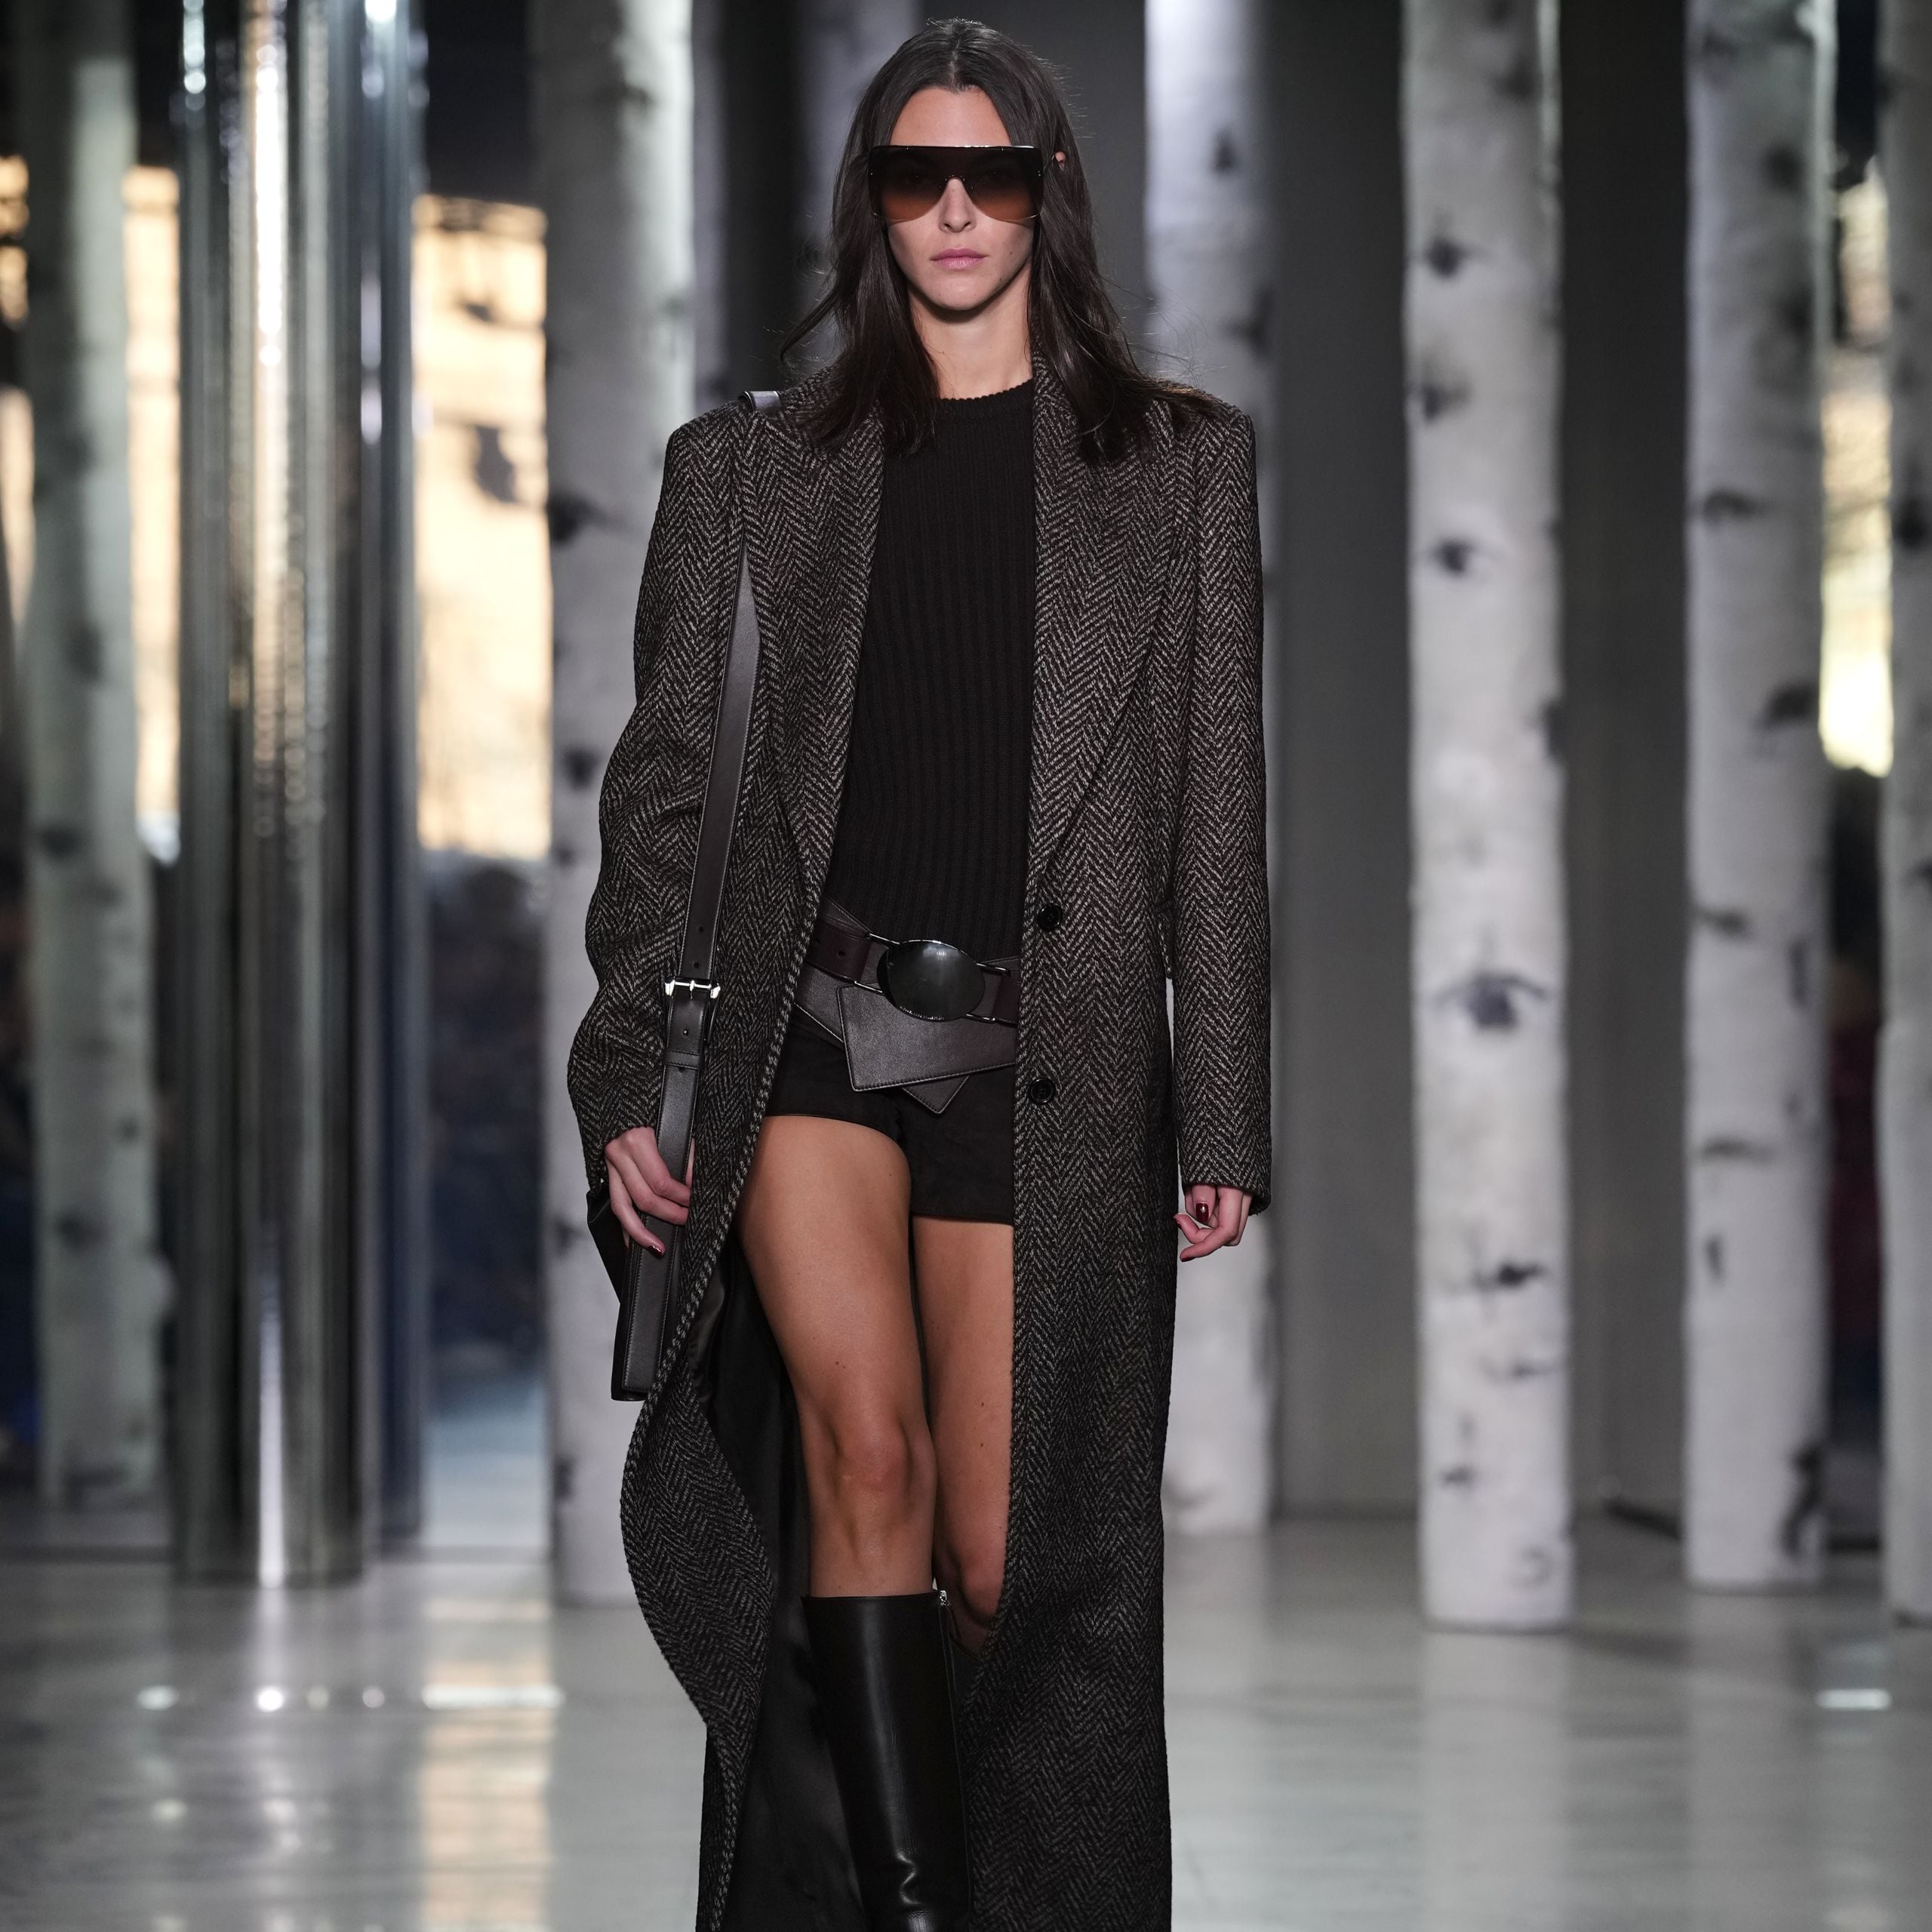 Michael Kors Collection Spring 2020 Ready-to-Wear Collection  Michael kors  collection, Michael kors outlet, Minimalist fashion women outfits